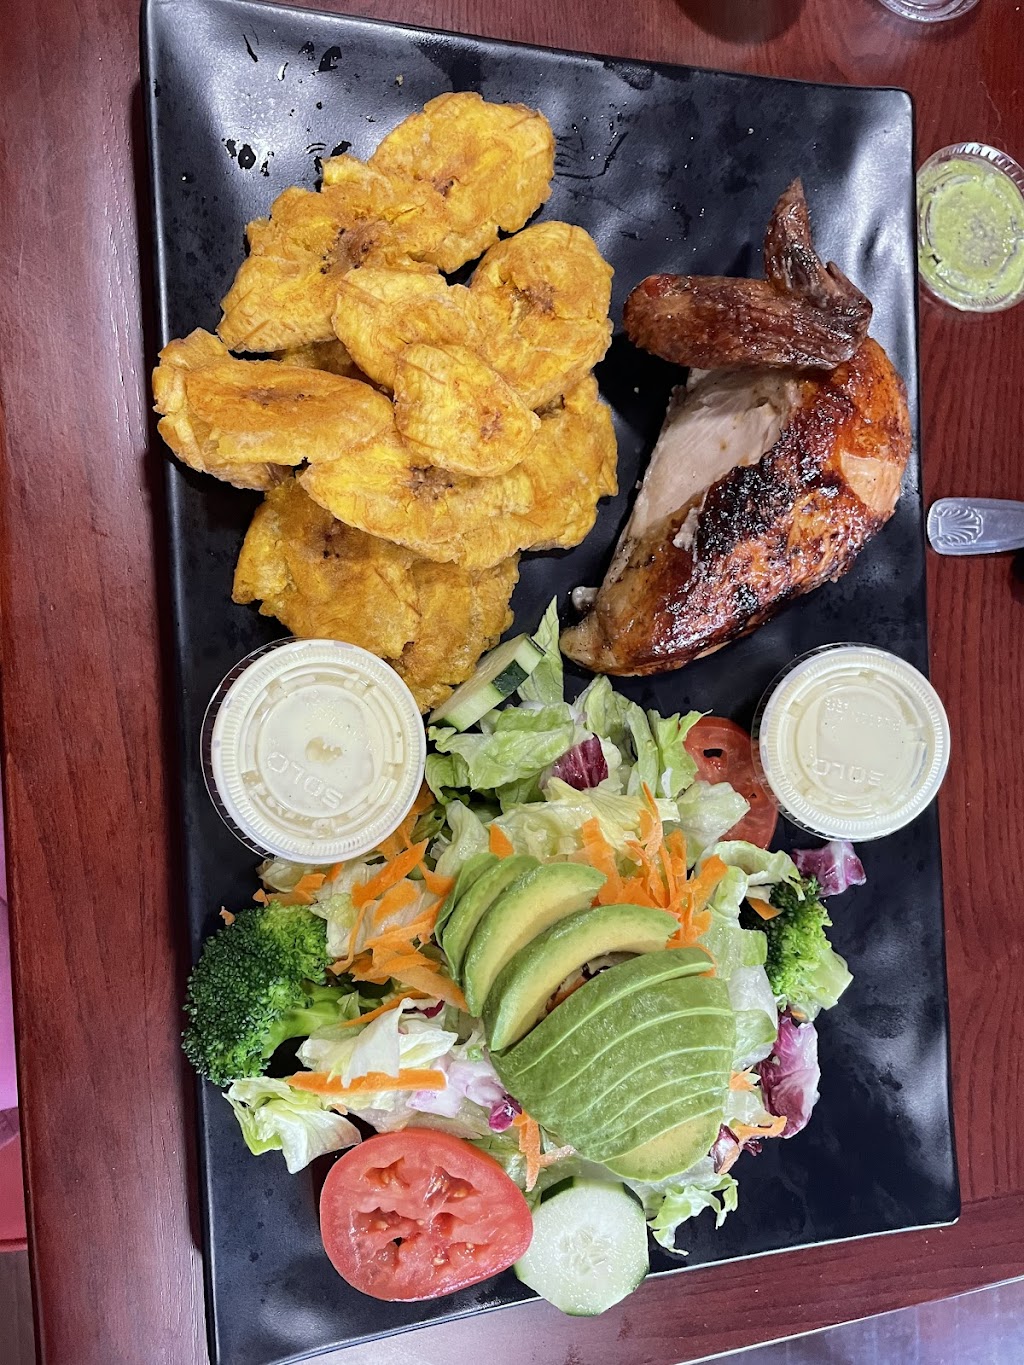 Don Pollo | 64-16 Fresh Pond Rd, Queens, NY 11385 | Phone: (718) 417-0300